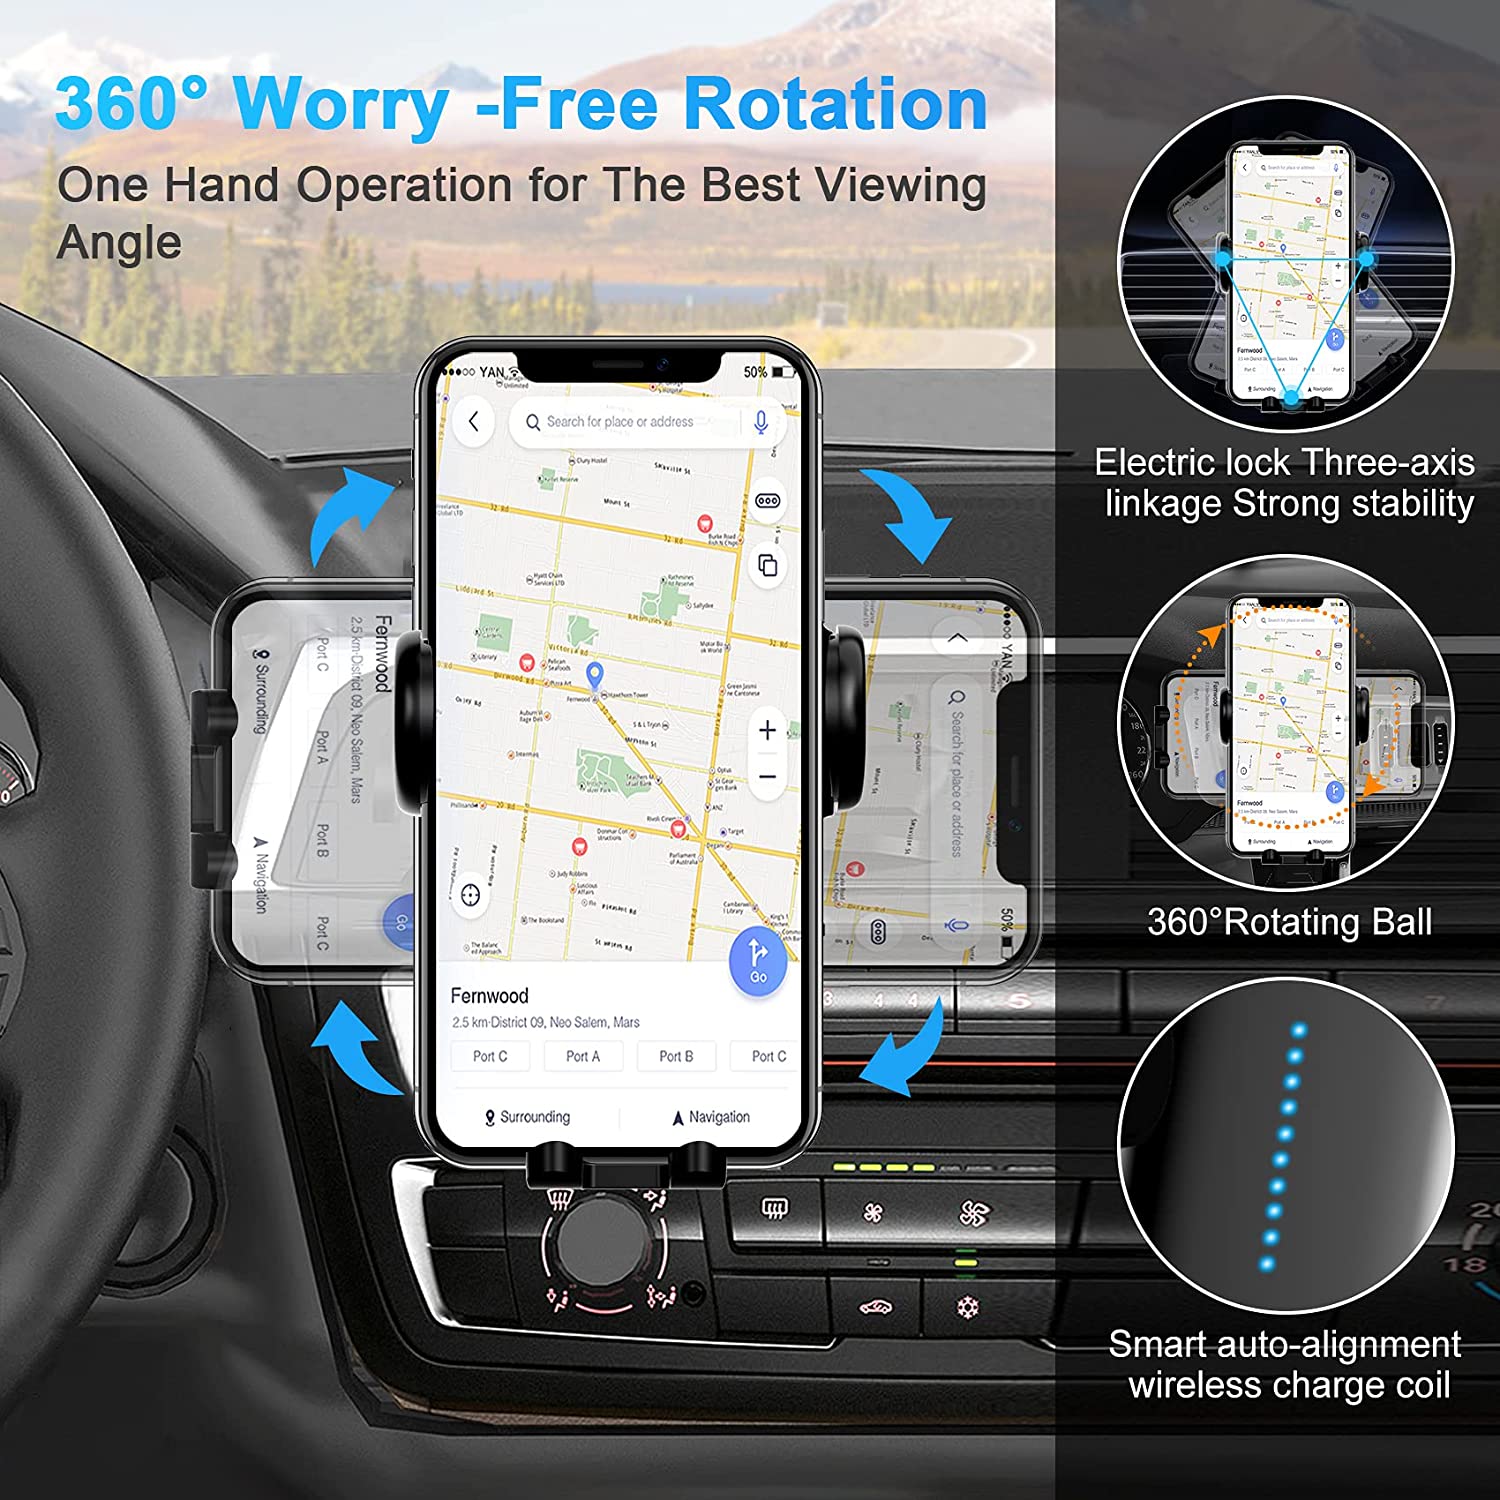 Wireless Car Charger, 15W Qi Fast Charging Sensor Auto Clamping Car Phone Holder Mount,Air Vent Wireless Phone Charger for Car, Wide Compatible with iPhone 12/12 mini/12 Pro/12 Pro Max